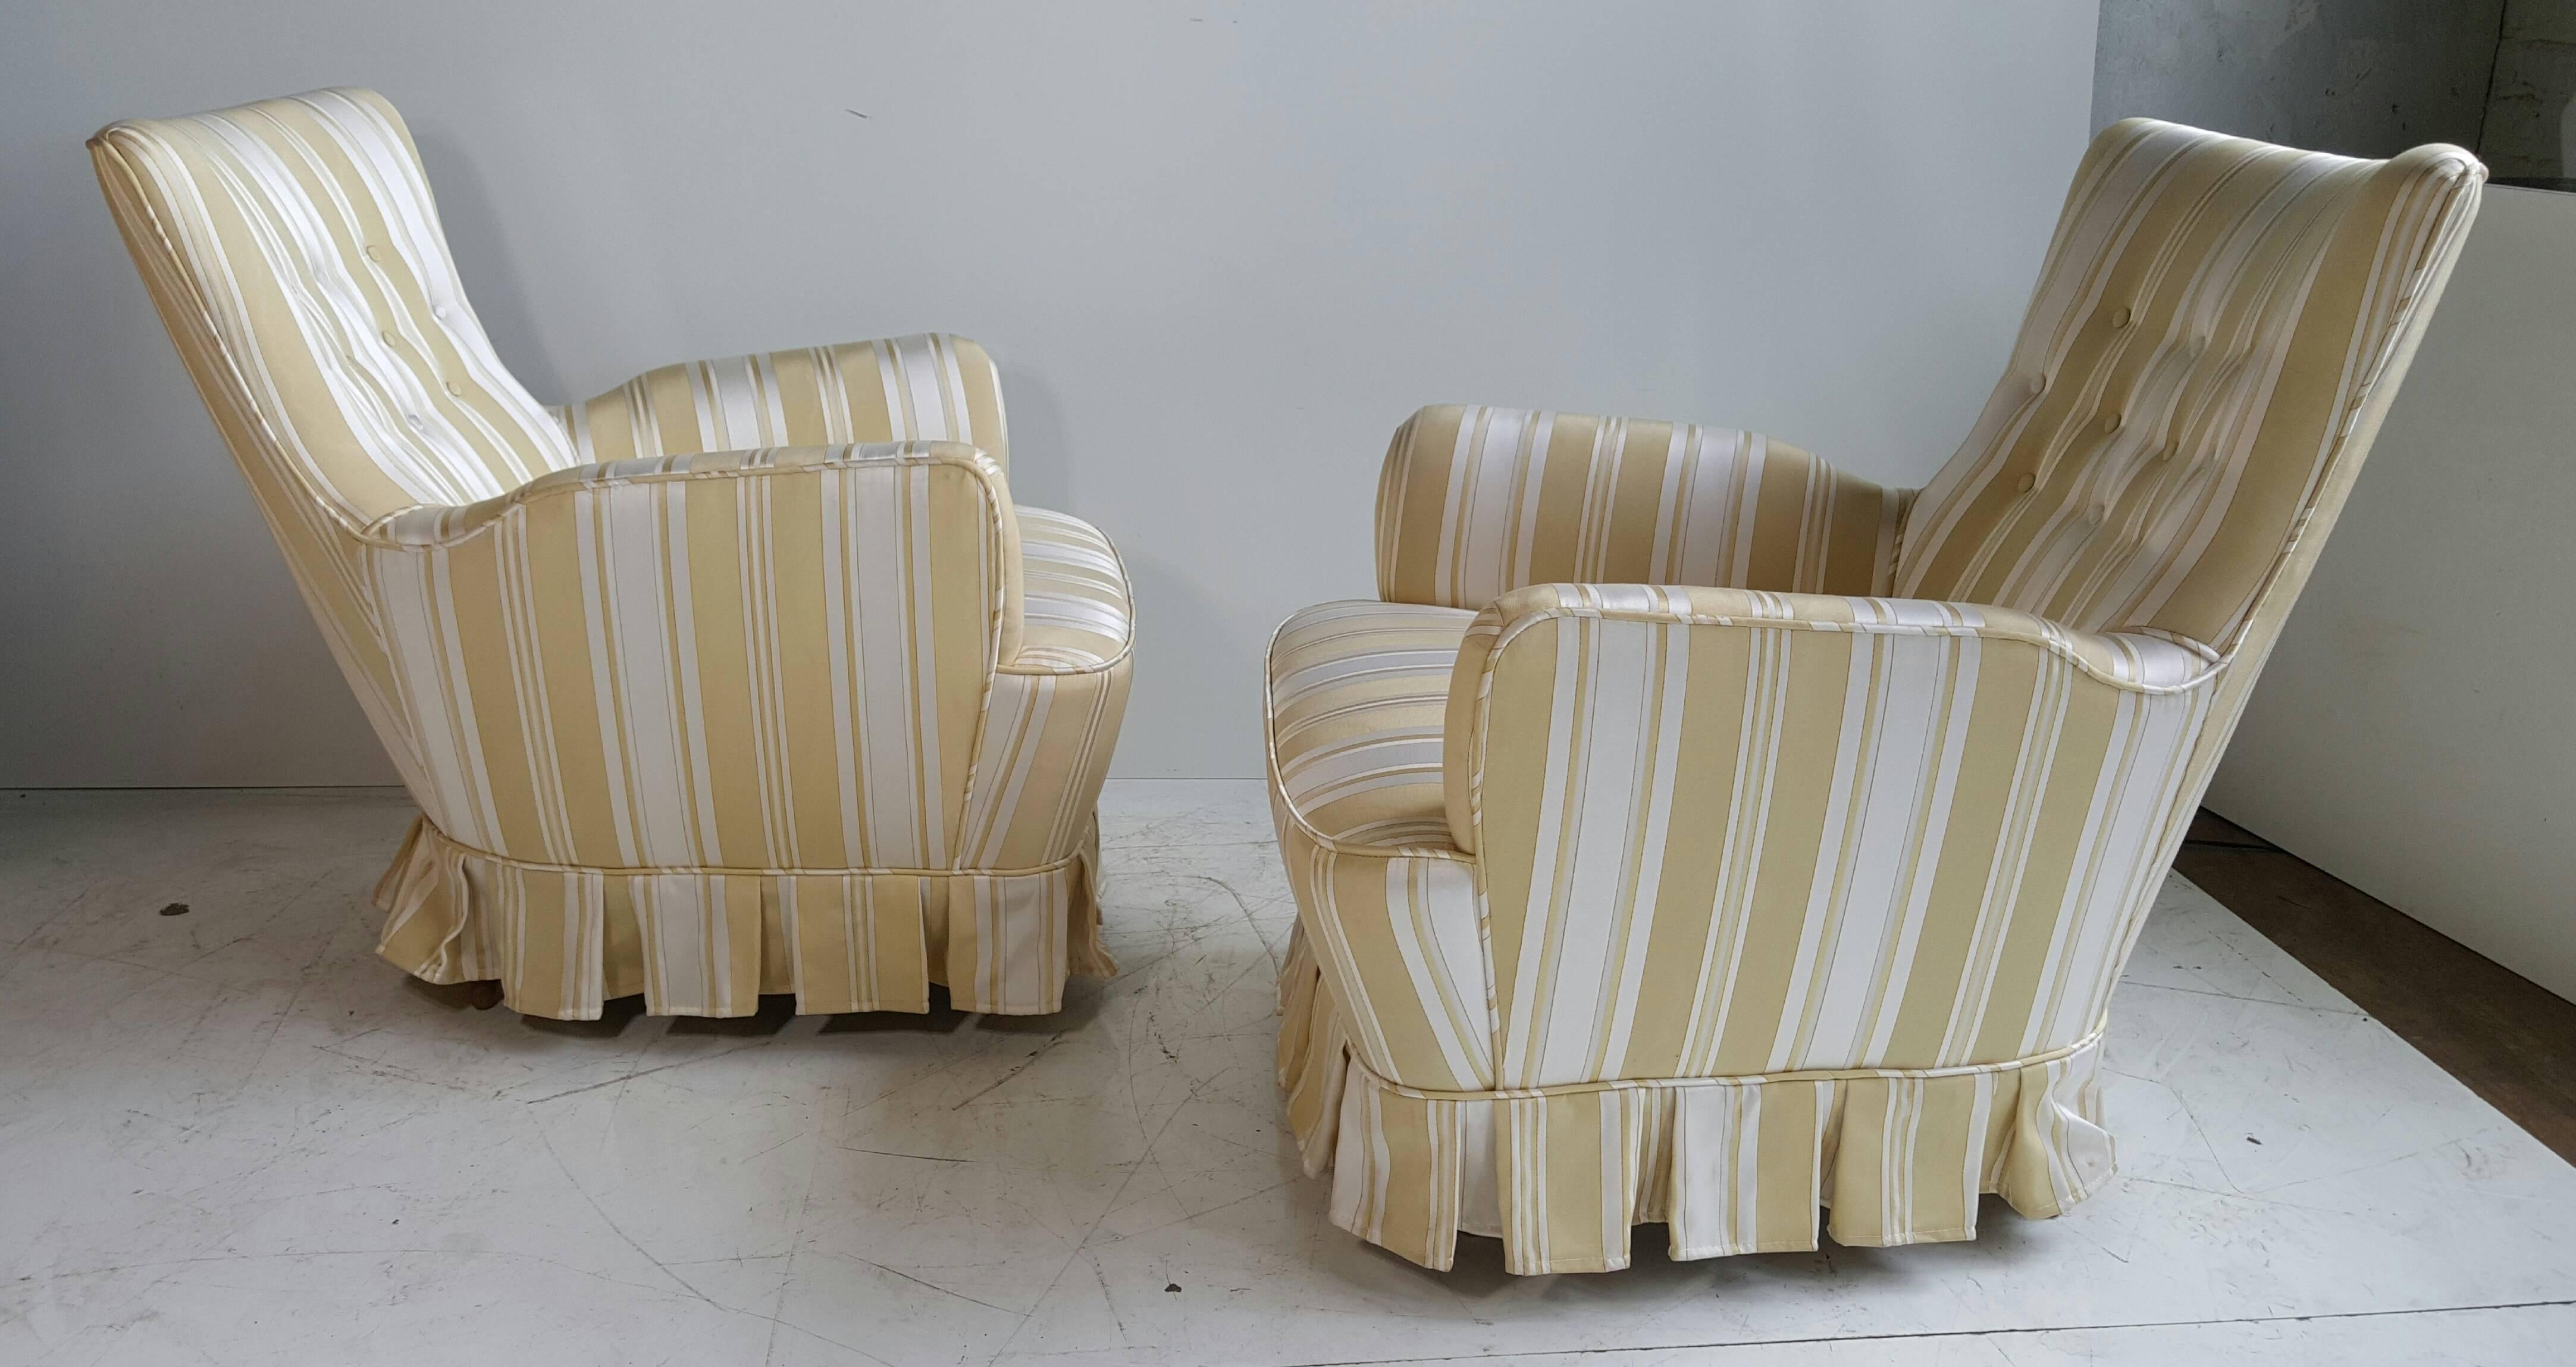 Stunning pair of modernist traditional Italian Boudoir chairs. Silk attributed to Paolo Buffa unusual slop down arm detail. Recently reupholstered in a wonderful silk fabric. Classic conical leg under traditional skirt, diminutive scale and